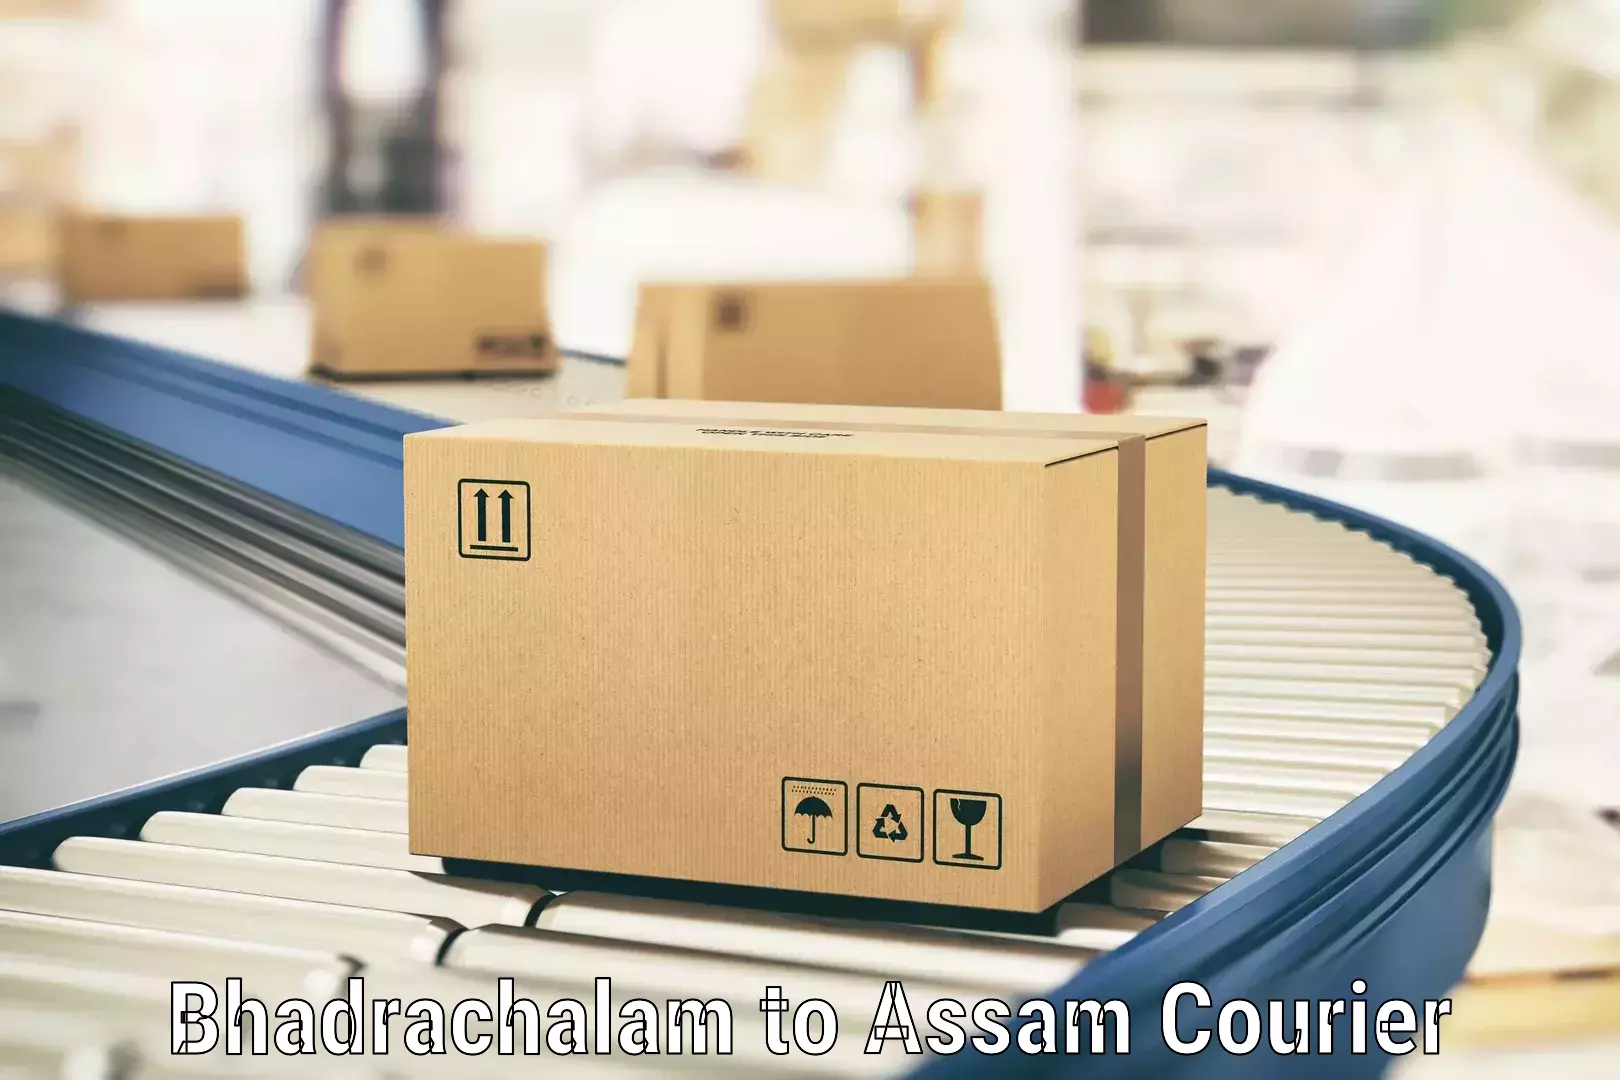 Same-day delivery solutions Bhadrachalam to IIIT Guwahati